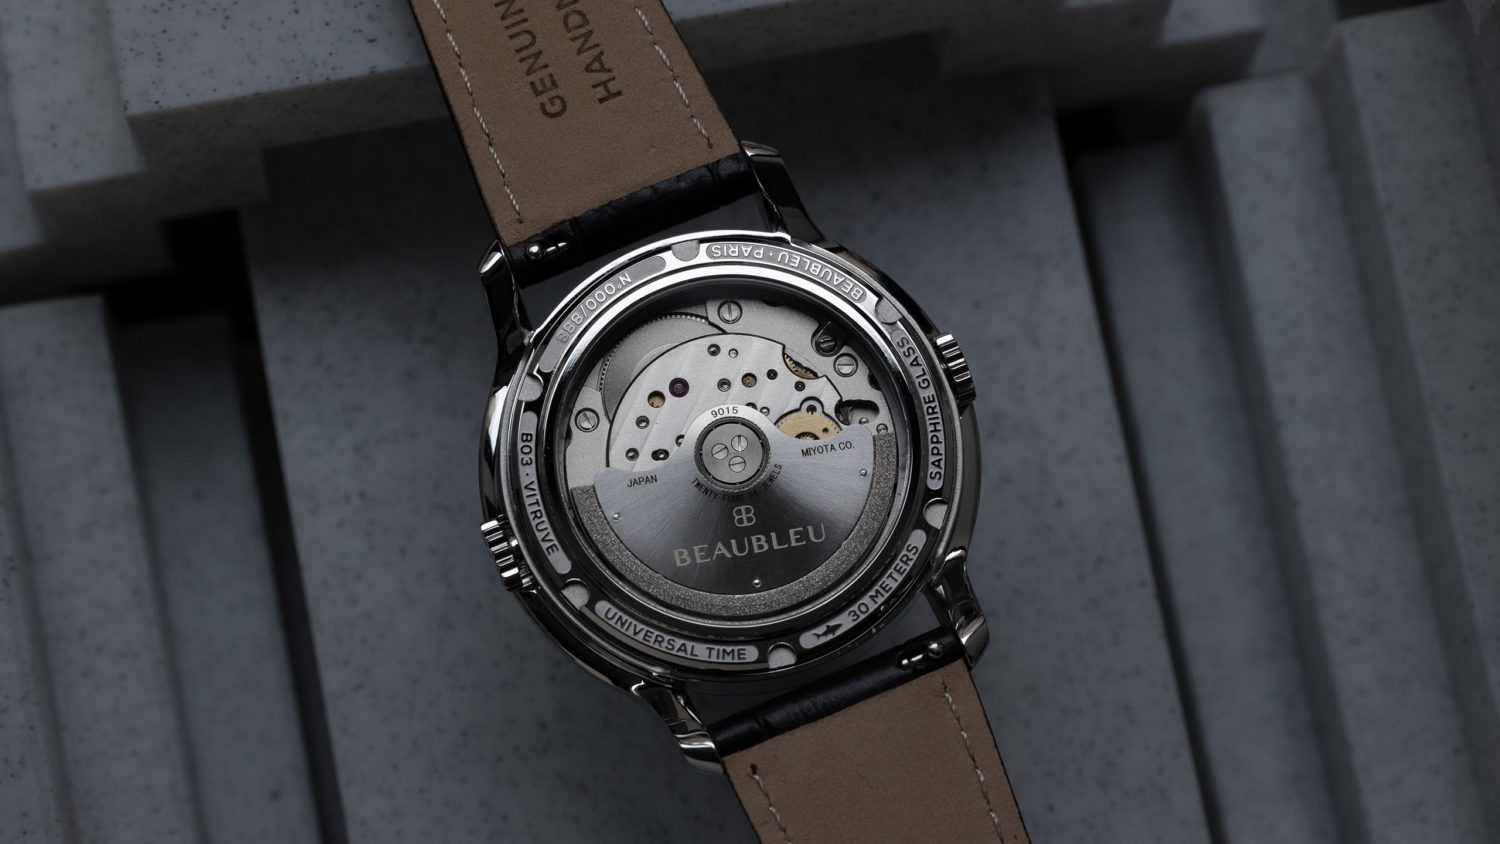 <p class="p1">Each of our watch is powered by the Miyota 9015 automatic movement, chosen for its reliability, finesse, and robustness. With a power reserve of 42 hours, it recharges itself with the movements of your wrist and has a adjustment of -7/+7 seconds per day.</p>